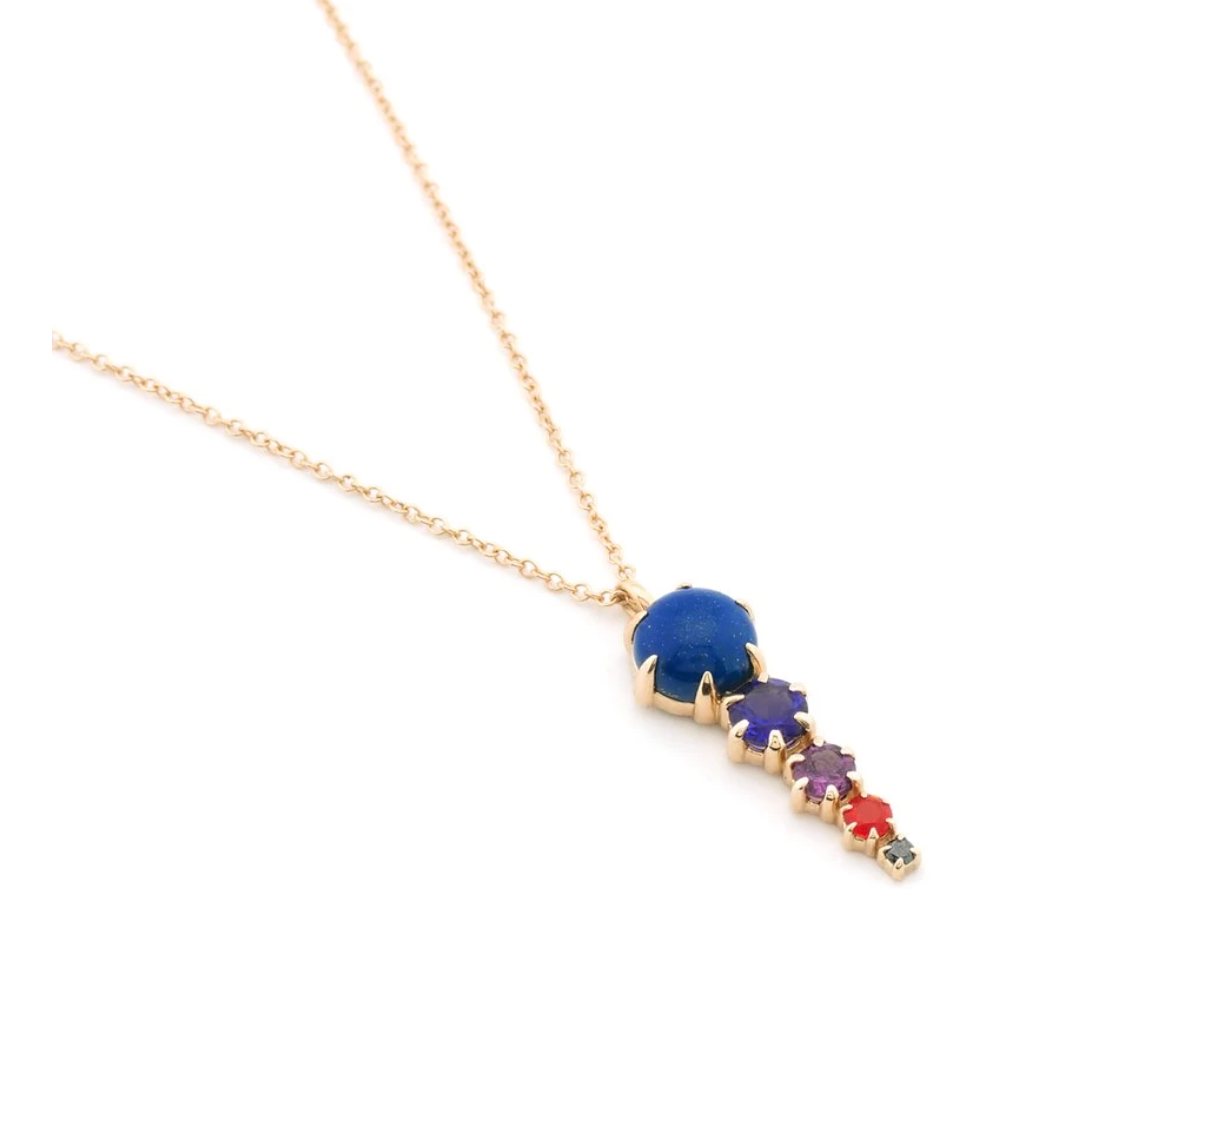 Load image into Gallery viewer, Gem spike pendant necklace, with Lapis, amethyst, garnet, fire opal, and black diamond gemstones, on white background.
